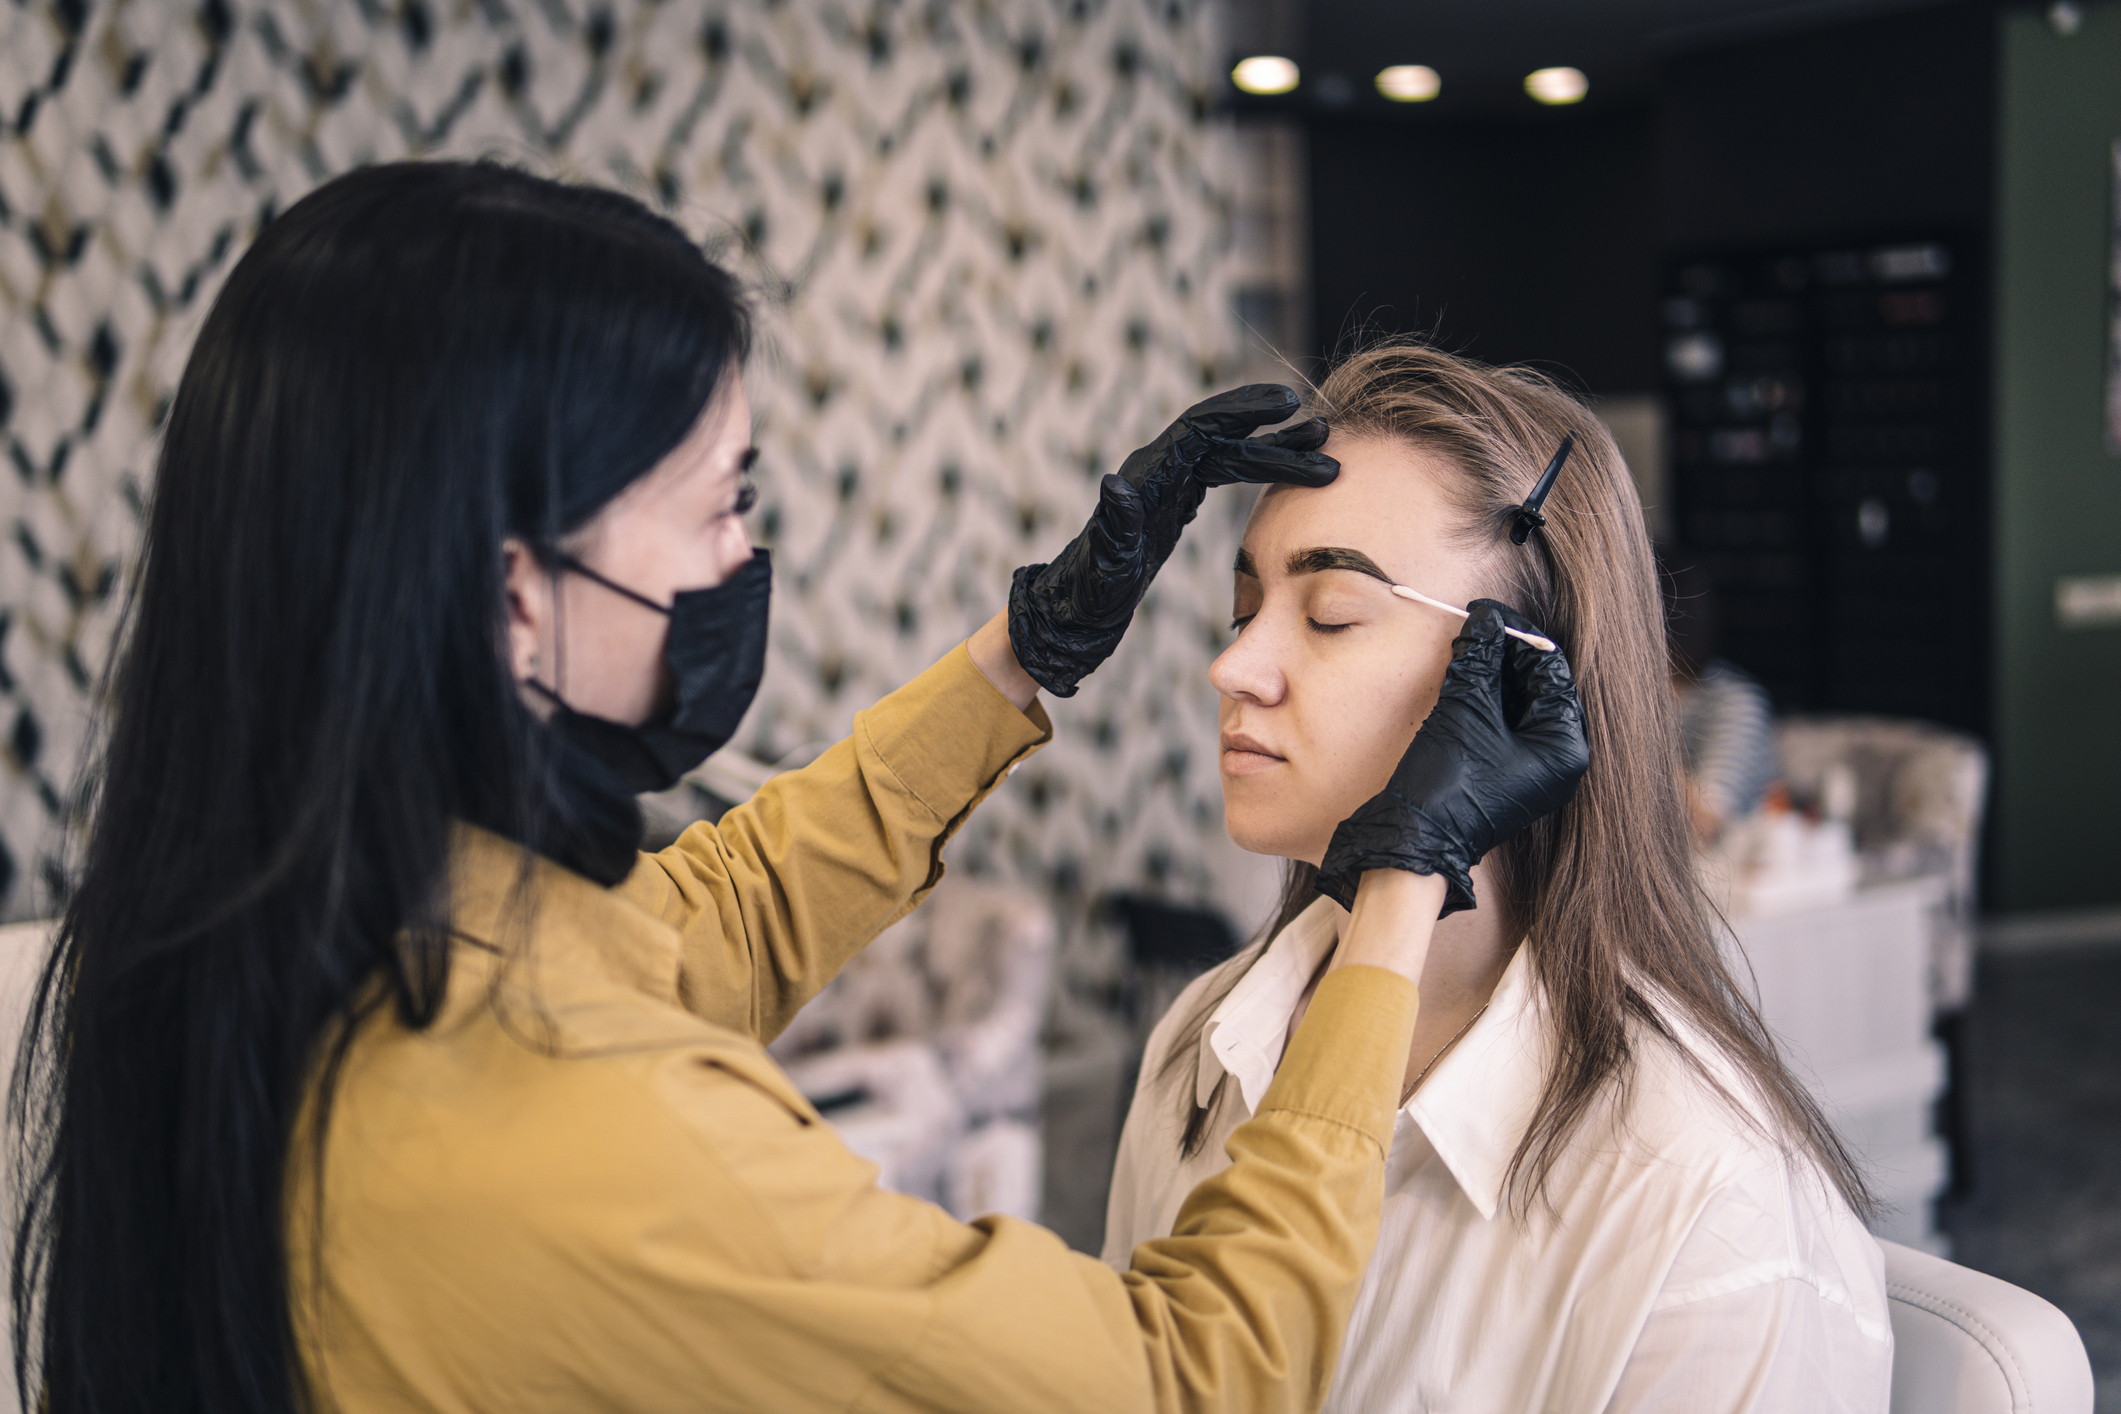 A master cosmetologist paints the eyebrows of a client in the salon close-up. eyebrow dyeing procedure, girl wipes paint from her eyebrows.